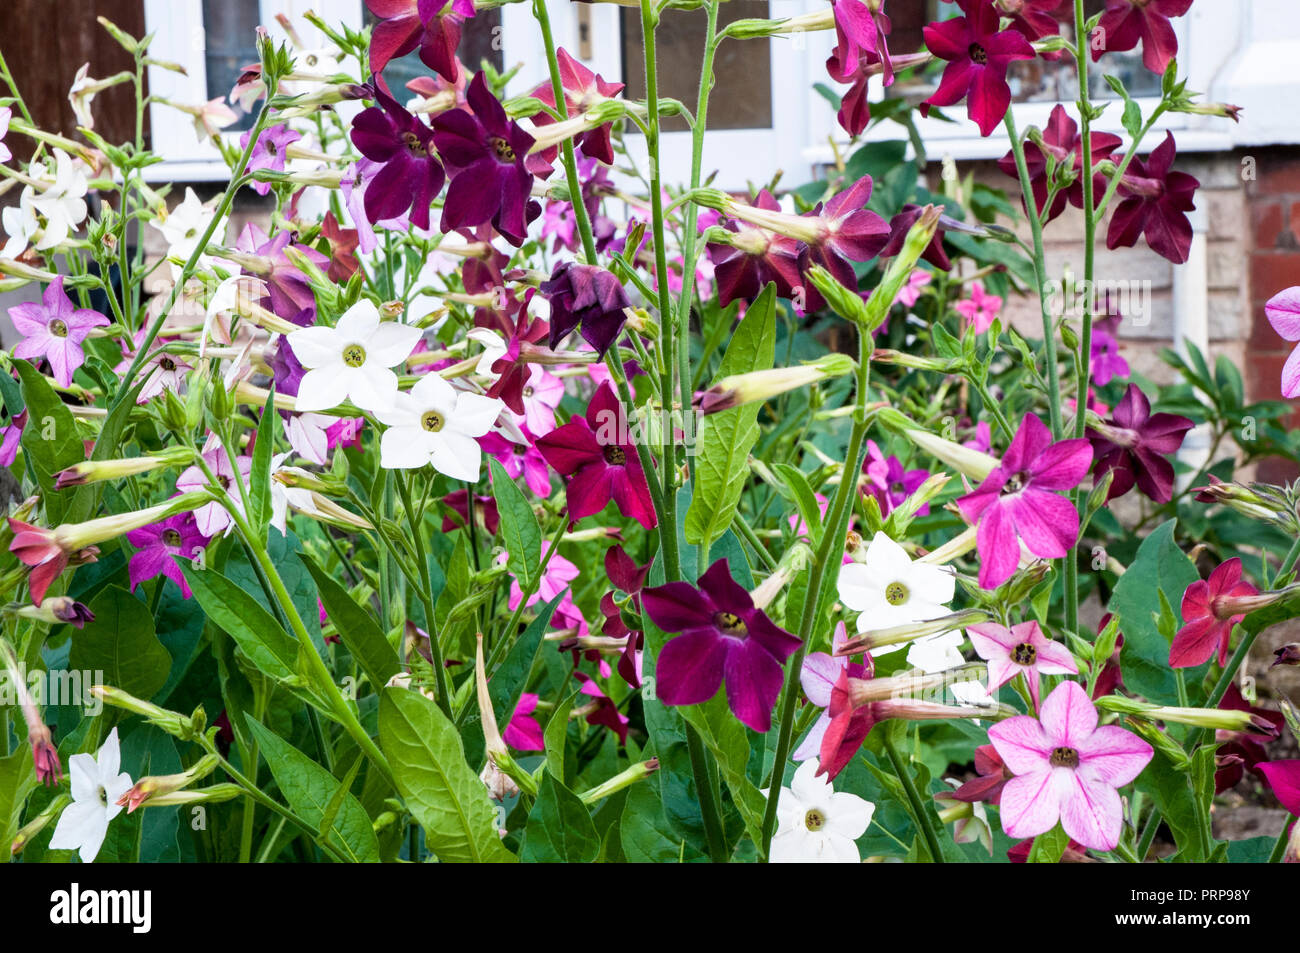 Nicotiana (Tobacco plant) Sensation mixed flowers in garden Stock Photo